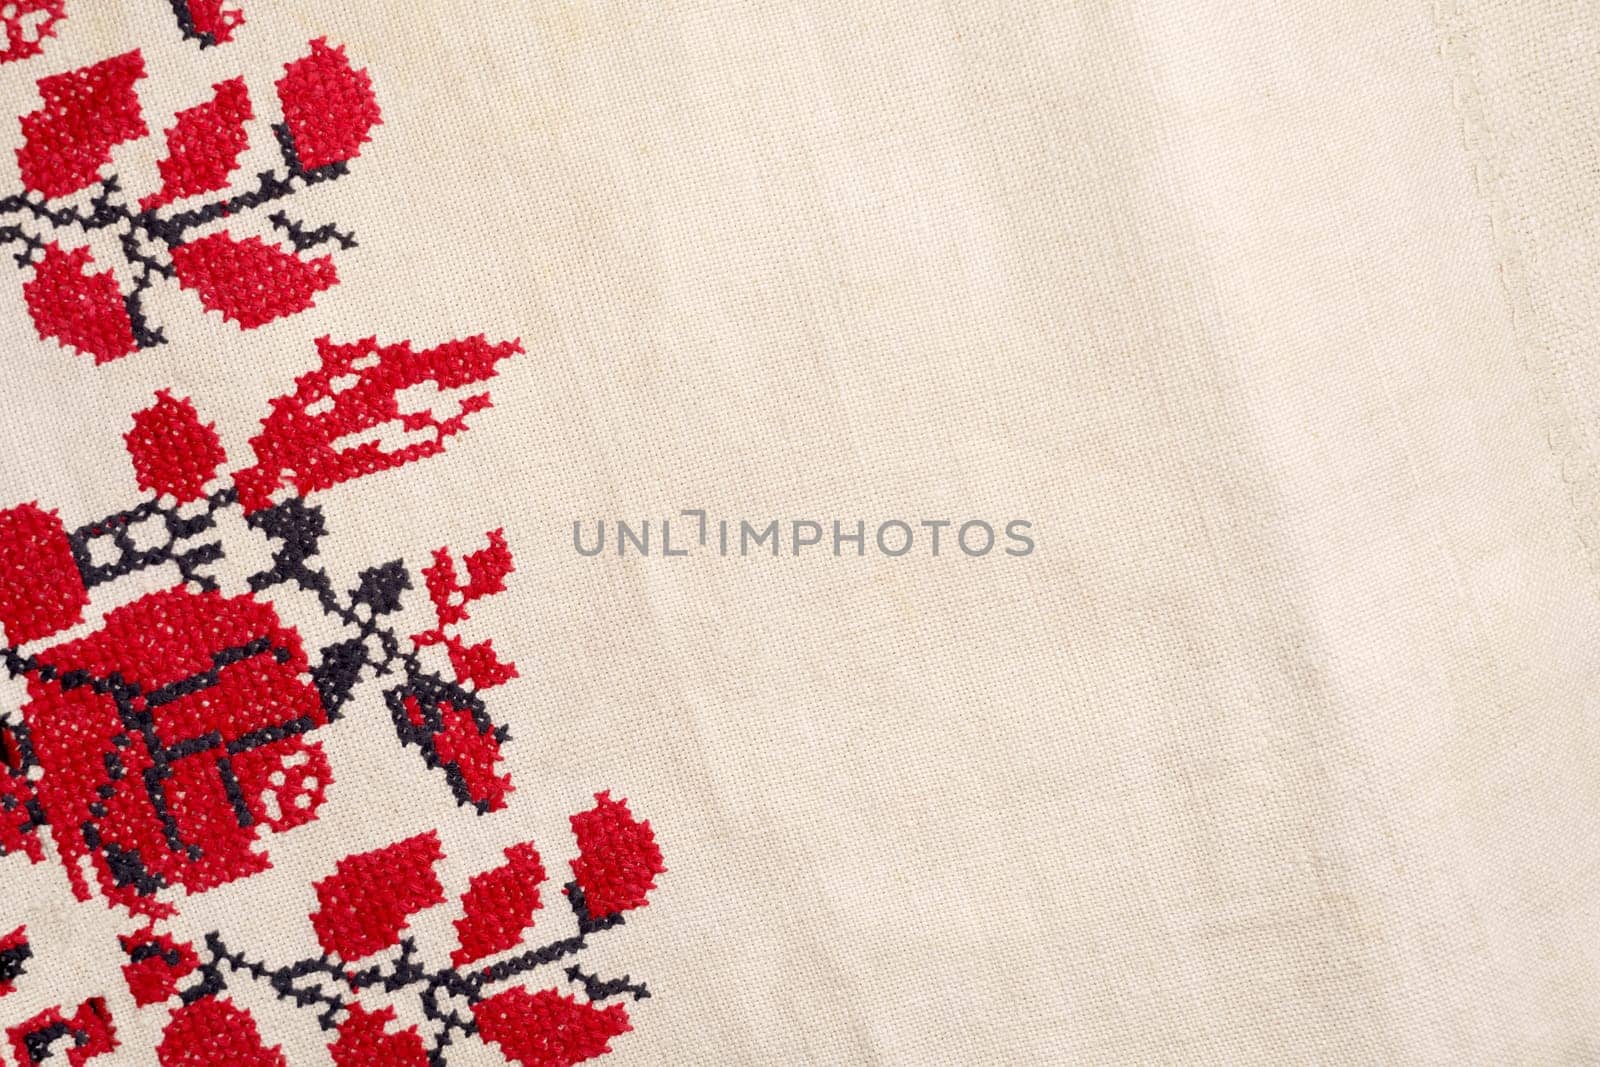 Line striped closeup weave fabric for kitchen towel material. Pinstripe fiber picnic table cloth . Black and red embroidery. Embroidered good like old handmade cross-stitch ethnic Ukraine pattern. Ukrainian rushnyk . Red version over white background. Beige white farmhouse style stripes texture. Woven linen cloth pattern background.